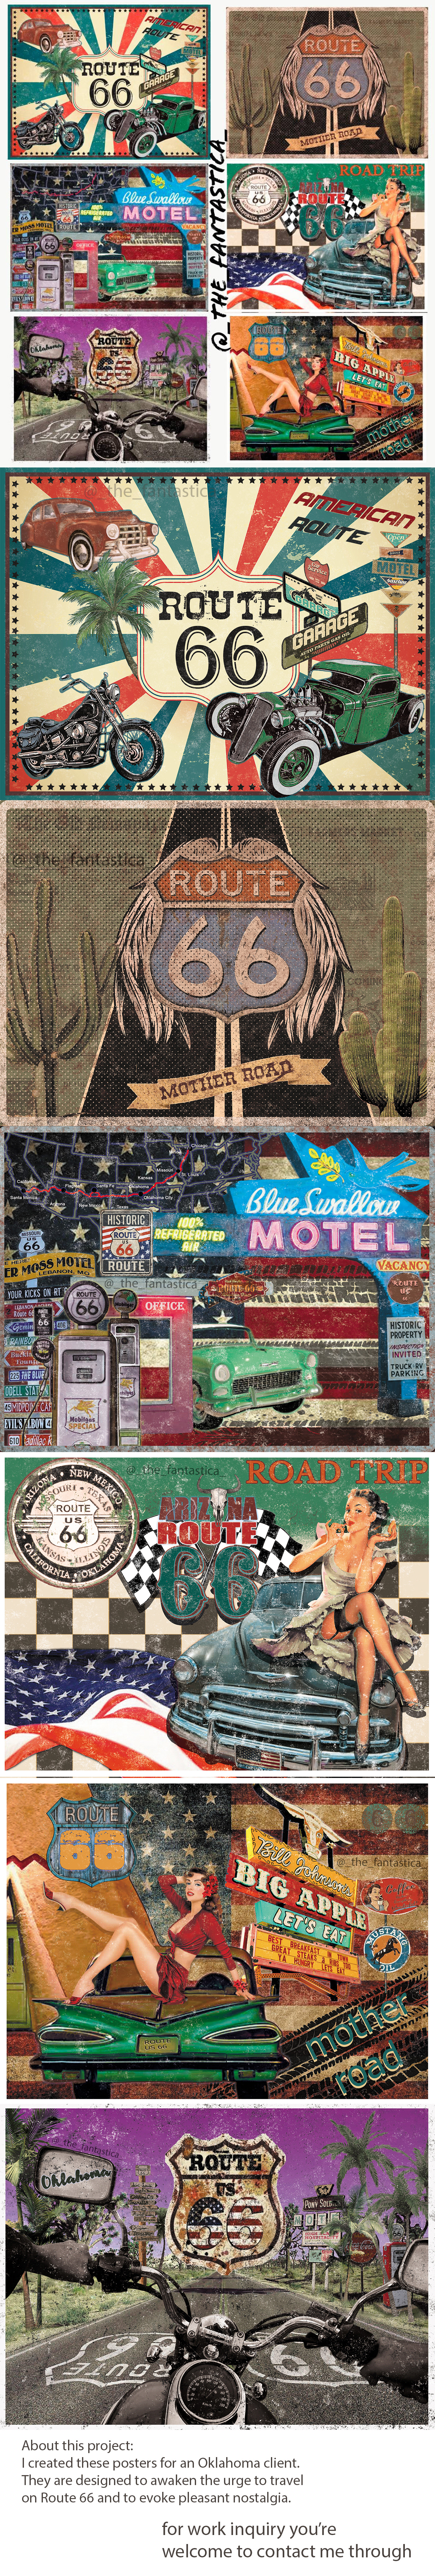 adobe american art ILLUSTRATION  oklahoma poster Project route66